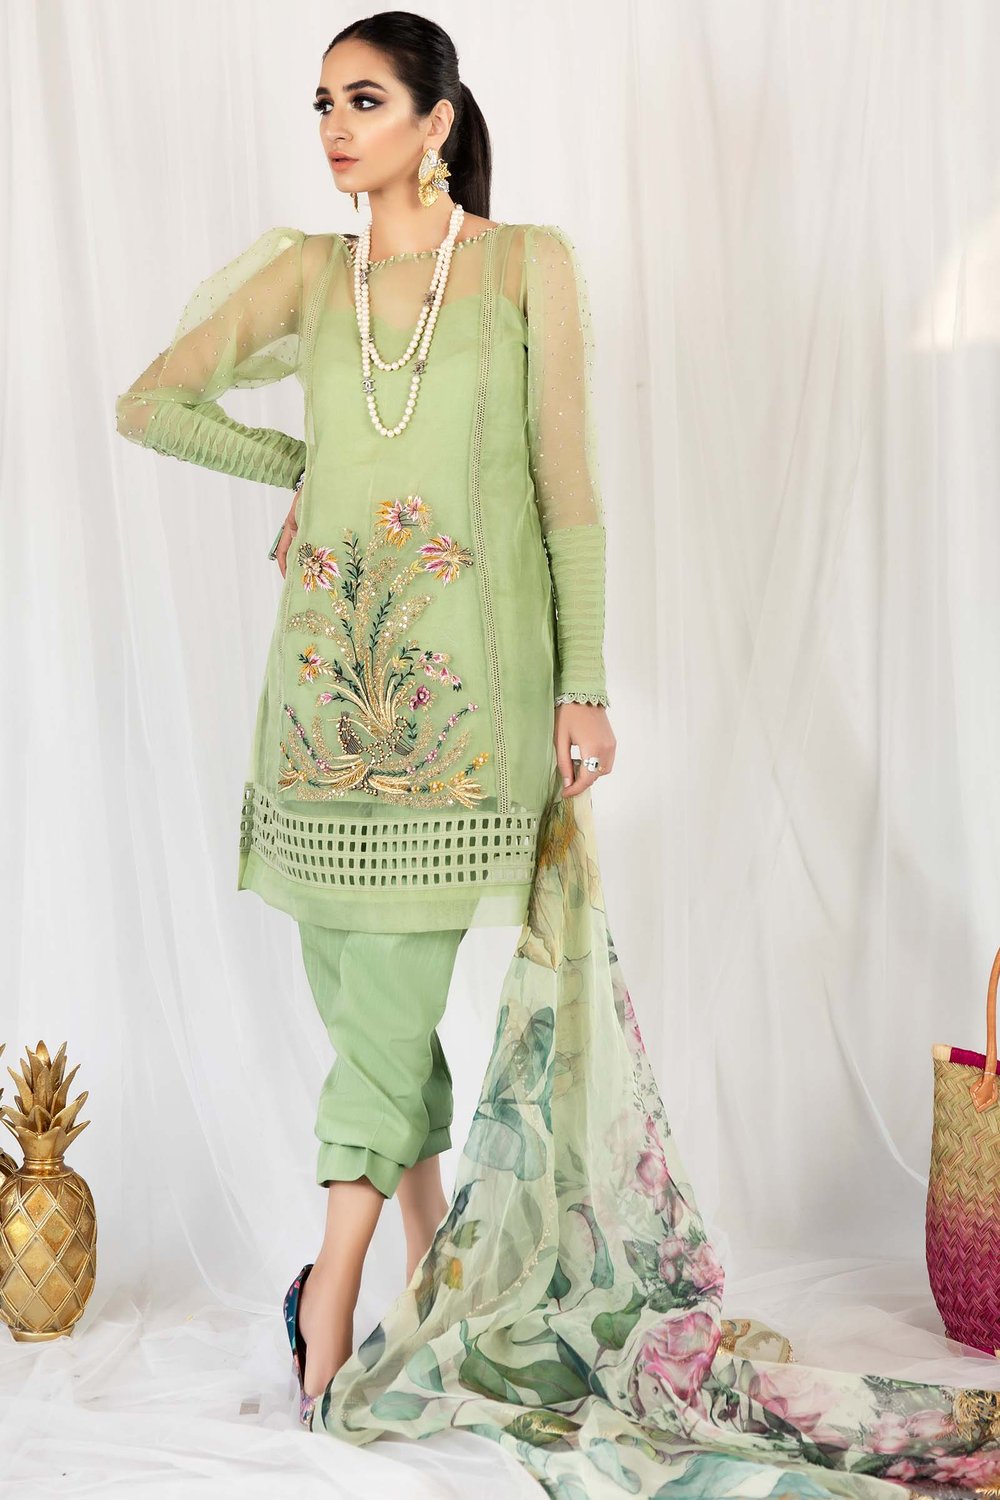 SHIZA HASSAN PRET COLLECTION | MEETHI EID '21- SUMBAL Green Wedding dress is exclusively at our online store. We have a huge variety of collections of Shiza Hassan, Maria b any many other top brands. This Wedding makes yourself look classy with our newest collections Buy Shiza Hassan Pret in UK USA from Lebaasonline